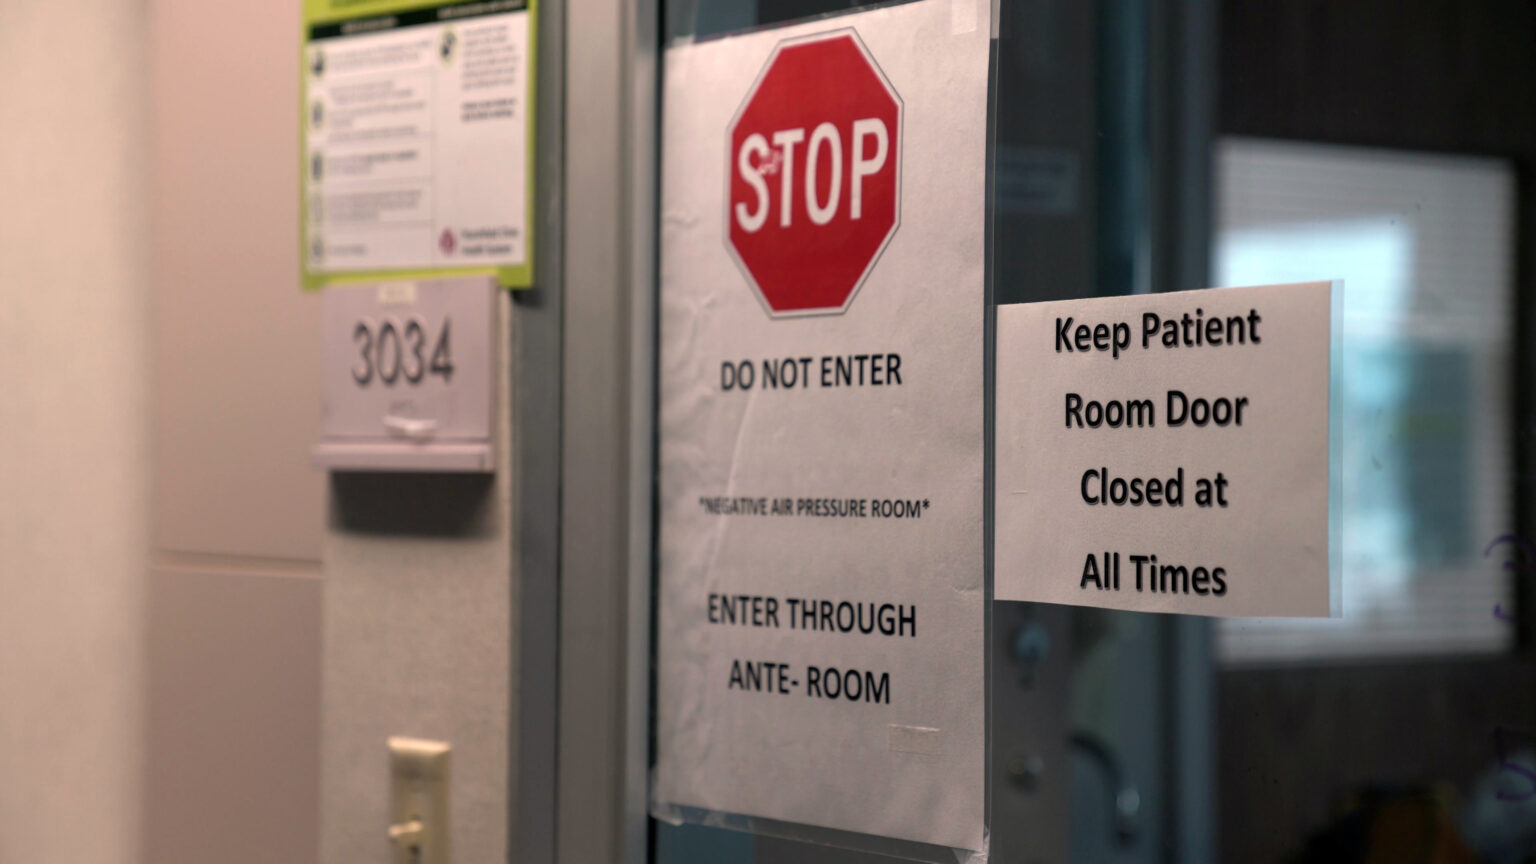 Paper signs reading Stop, Do Not Enter, *Negative Air Pressure Room* and Keep Patient Room Door Closed at All Times at taped to a sliding glass door of a hospital room.